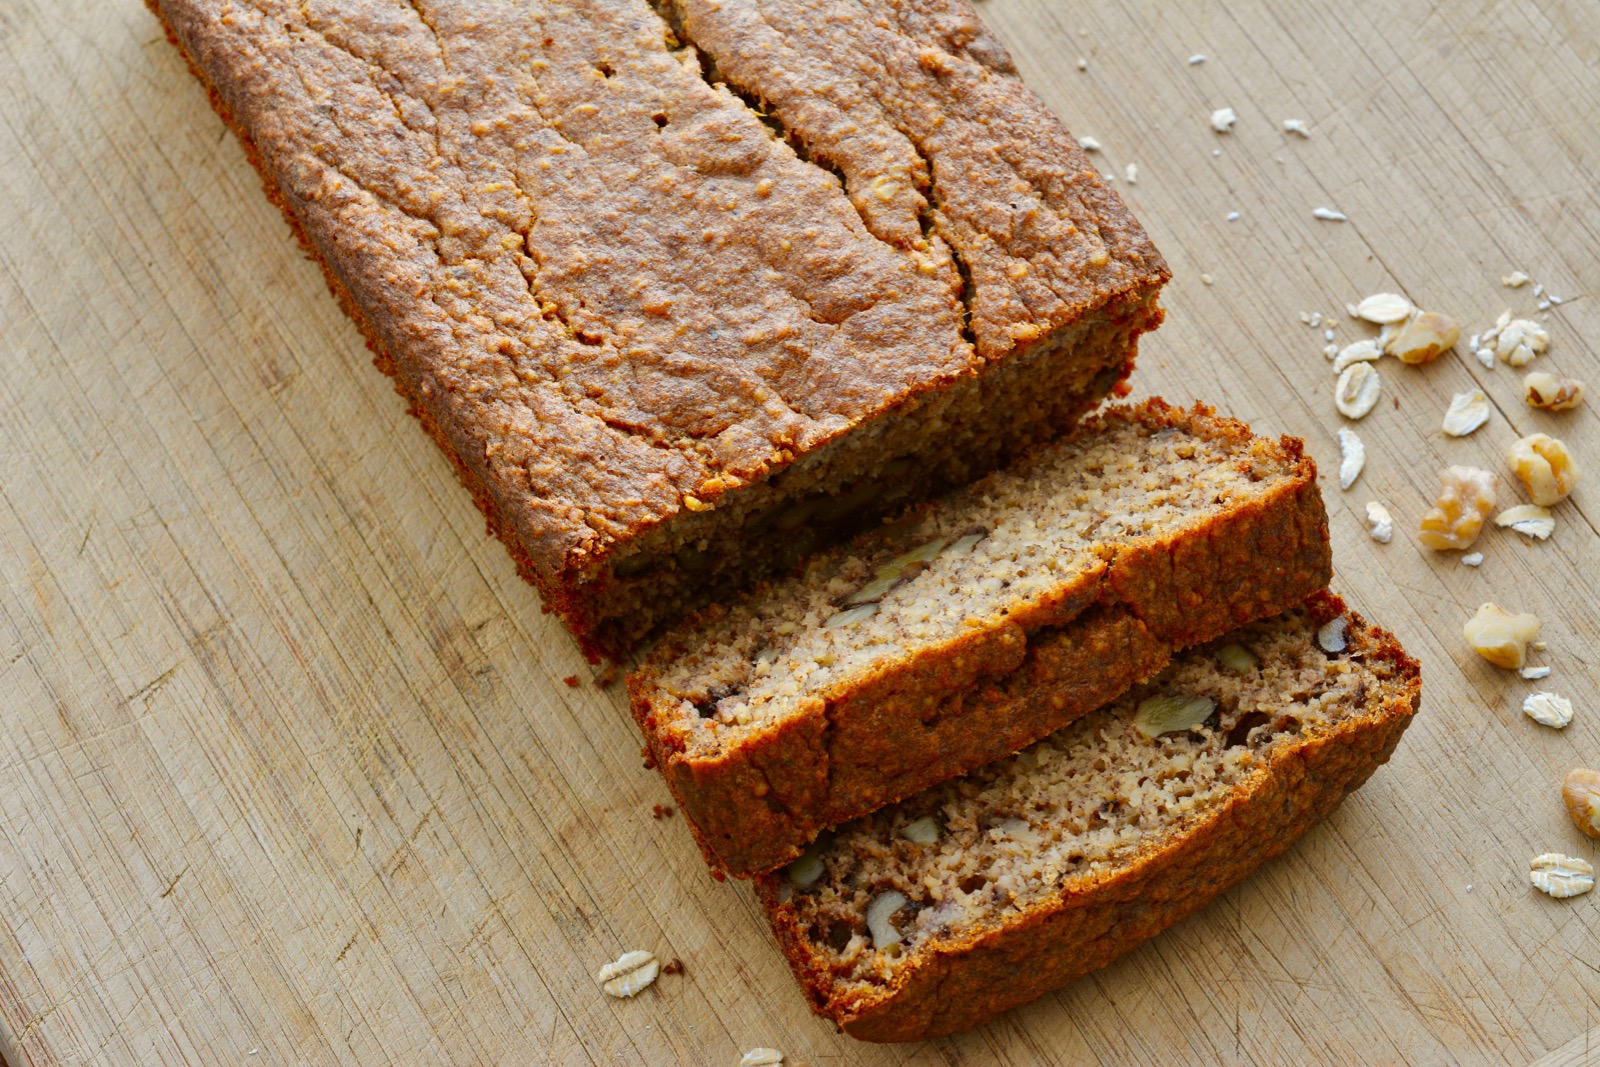 Gluten Free Banana Bread With Oat Flour (Sugar Free and Dairy Free too)